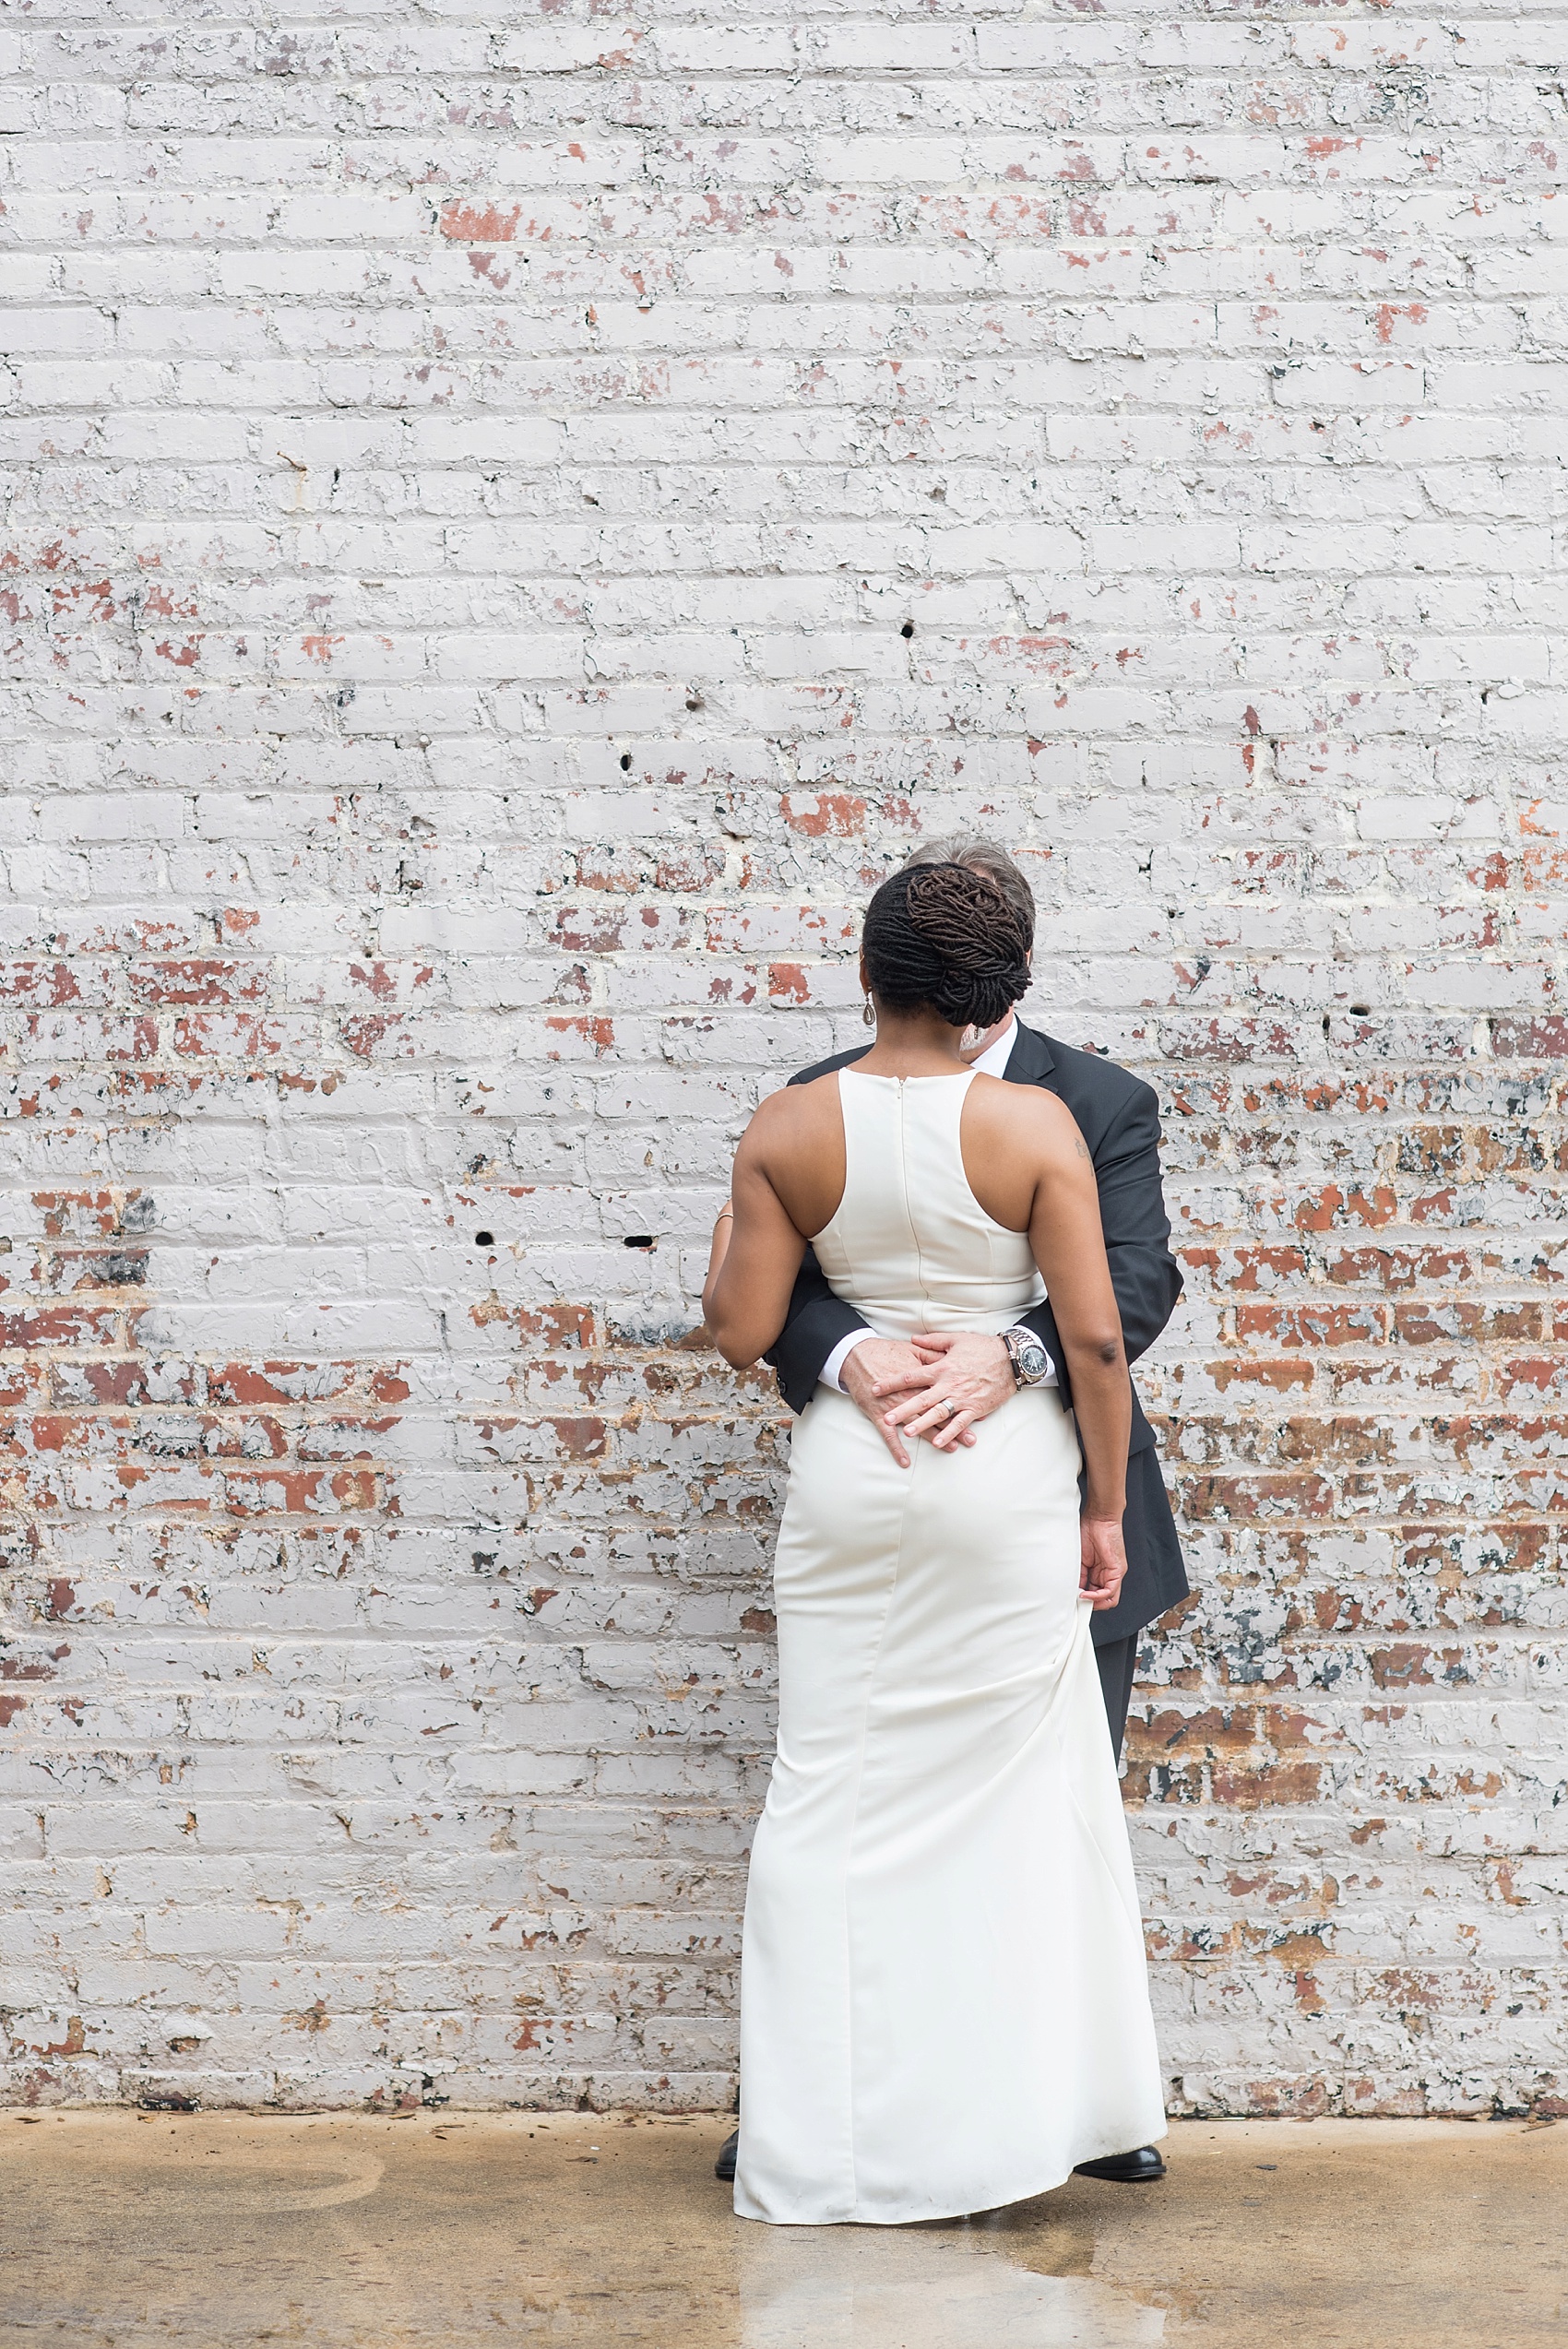 Downtown Raleigh, NC mixed race wedding. Photos by Mikkel Paige Photography. Photos of the bride and groom. 